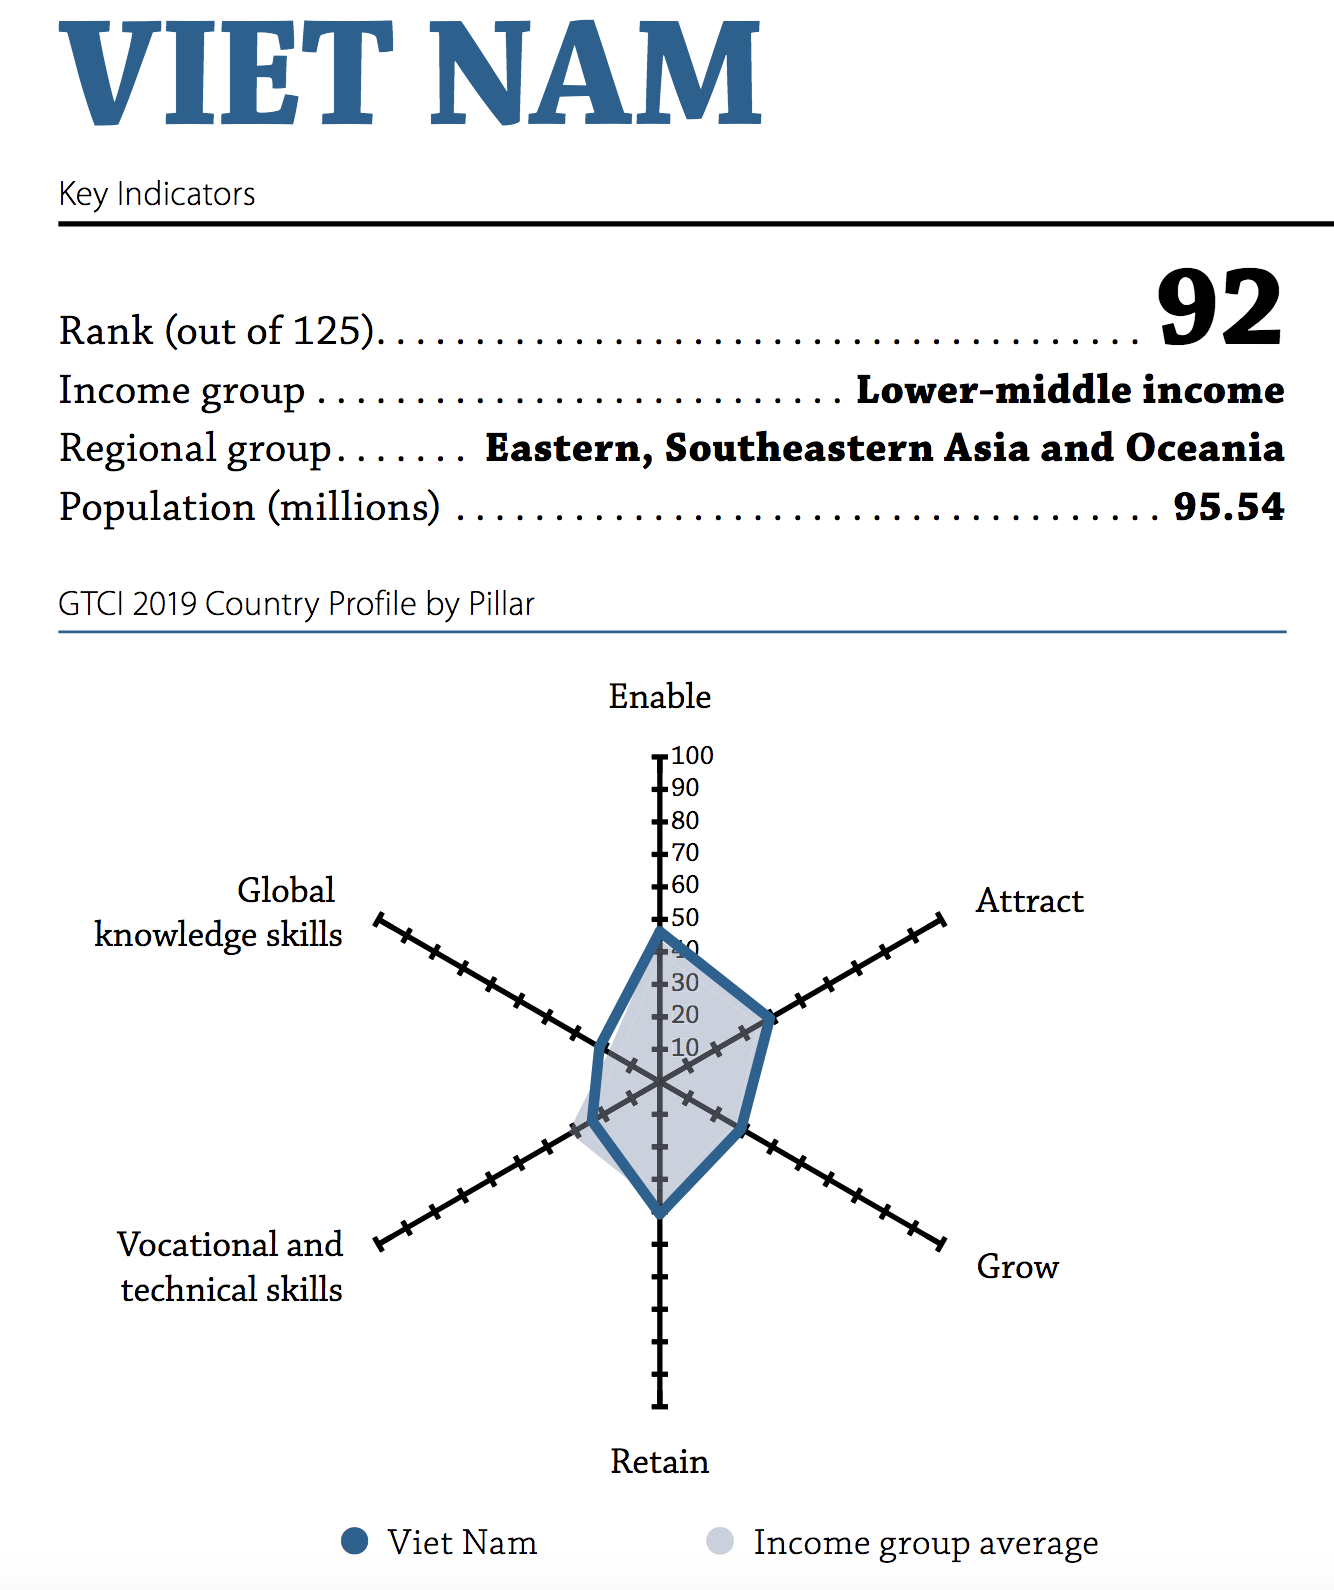 Thứ hạng của Việt Nam trong The Global Talent Competitiveness Index 2019 (nguồn: www.insead.edu)